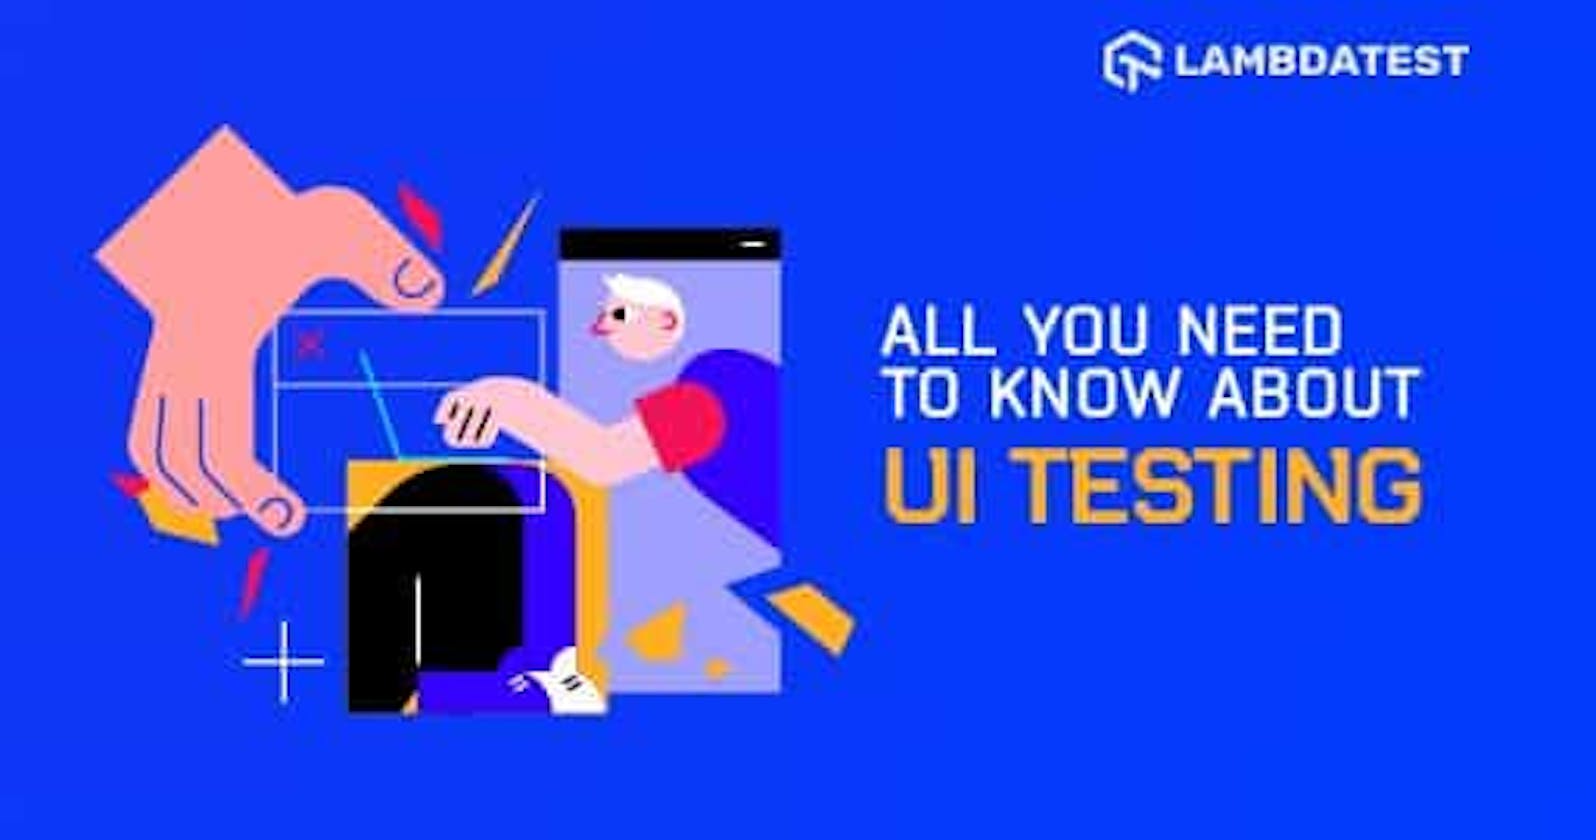 All You Need To Know About UI Testing